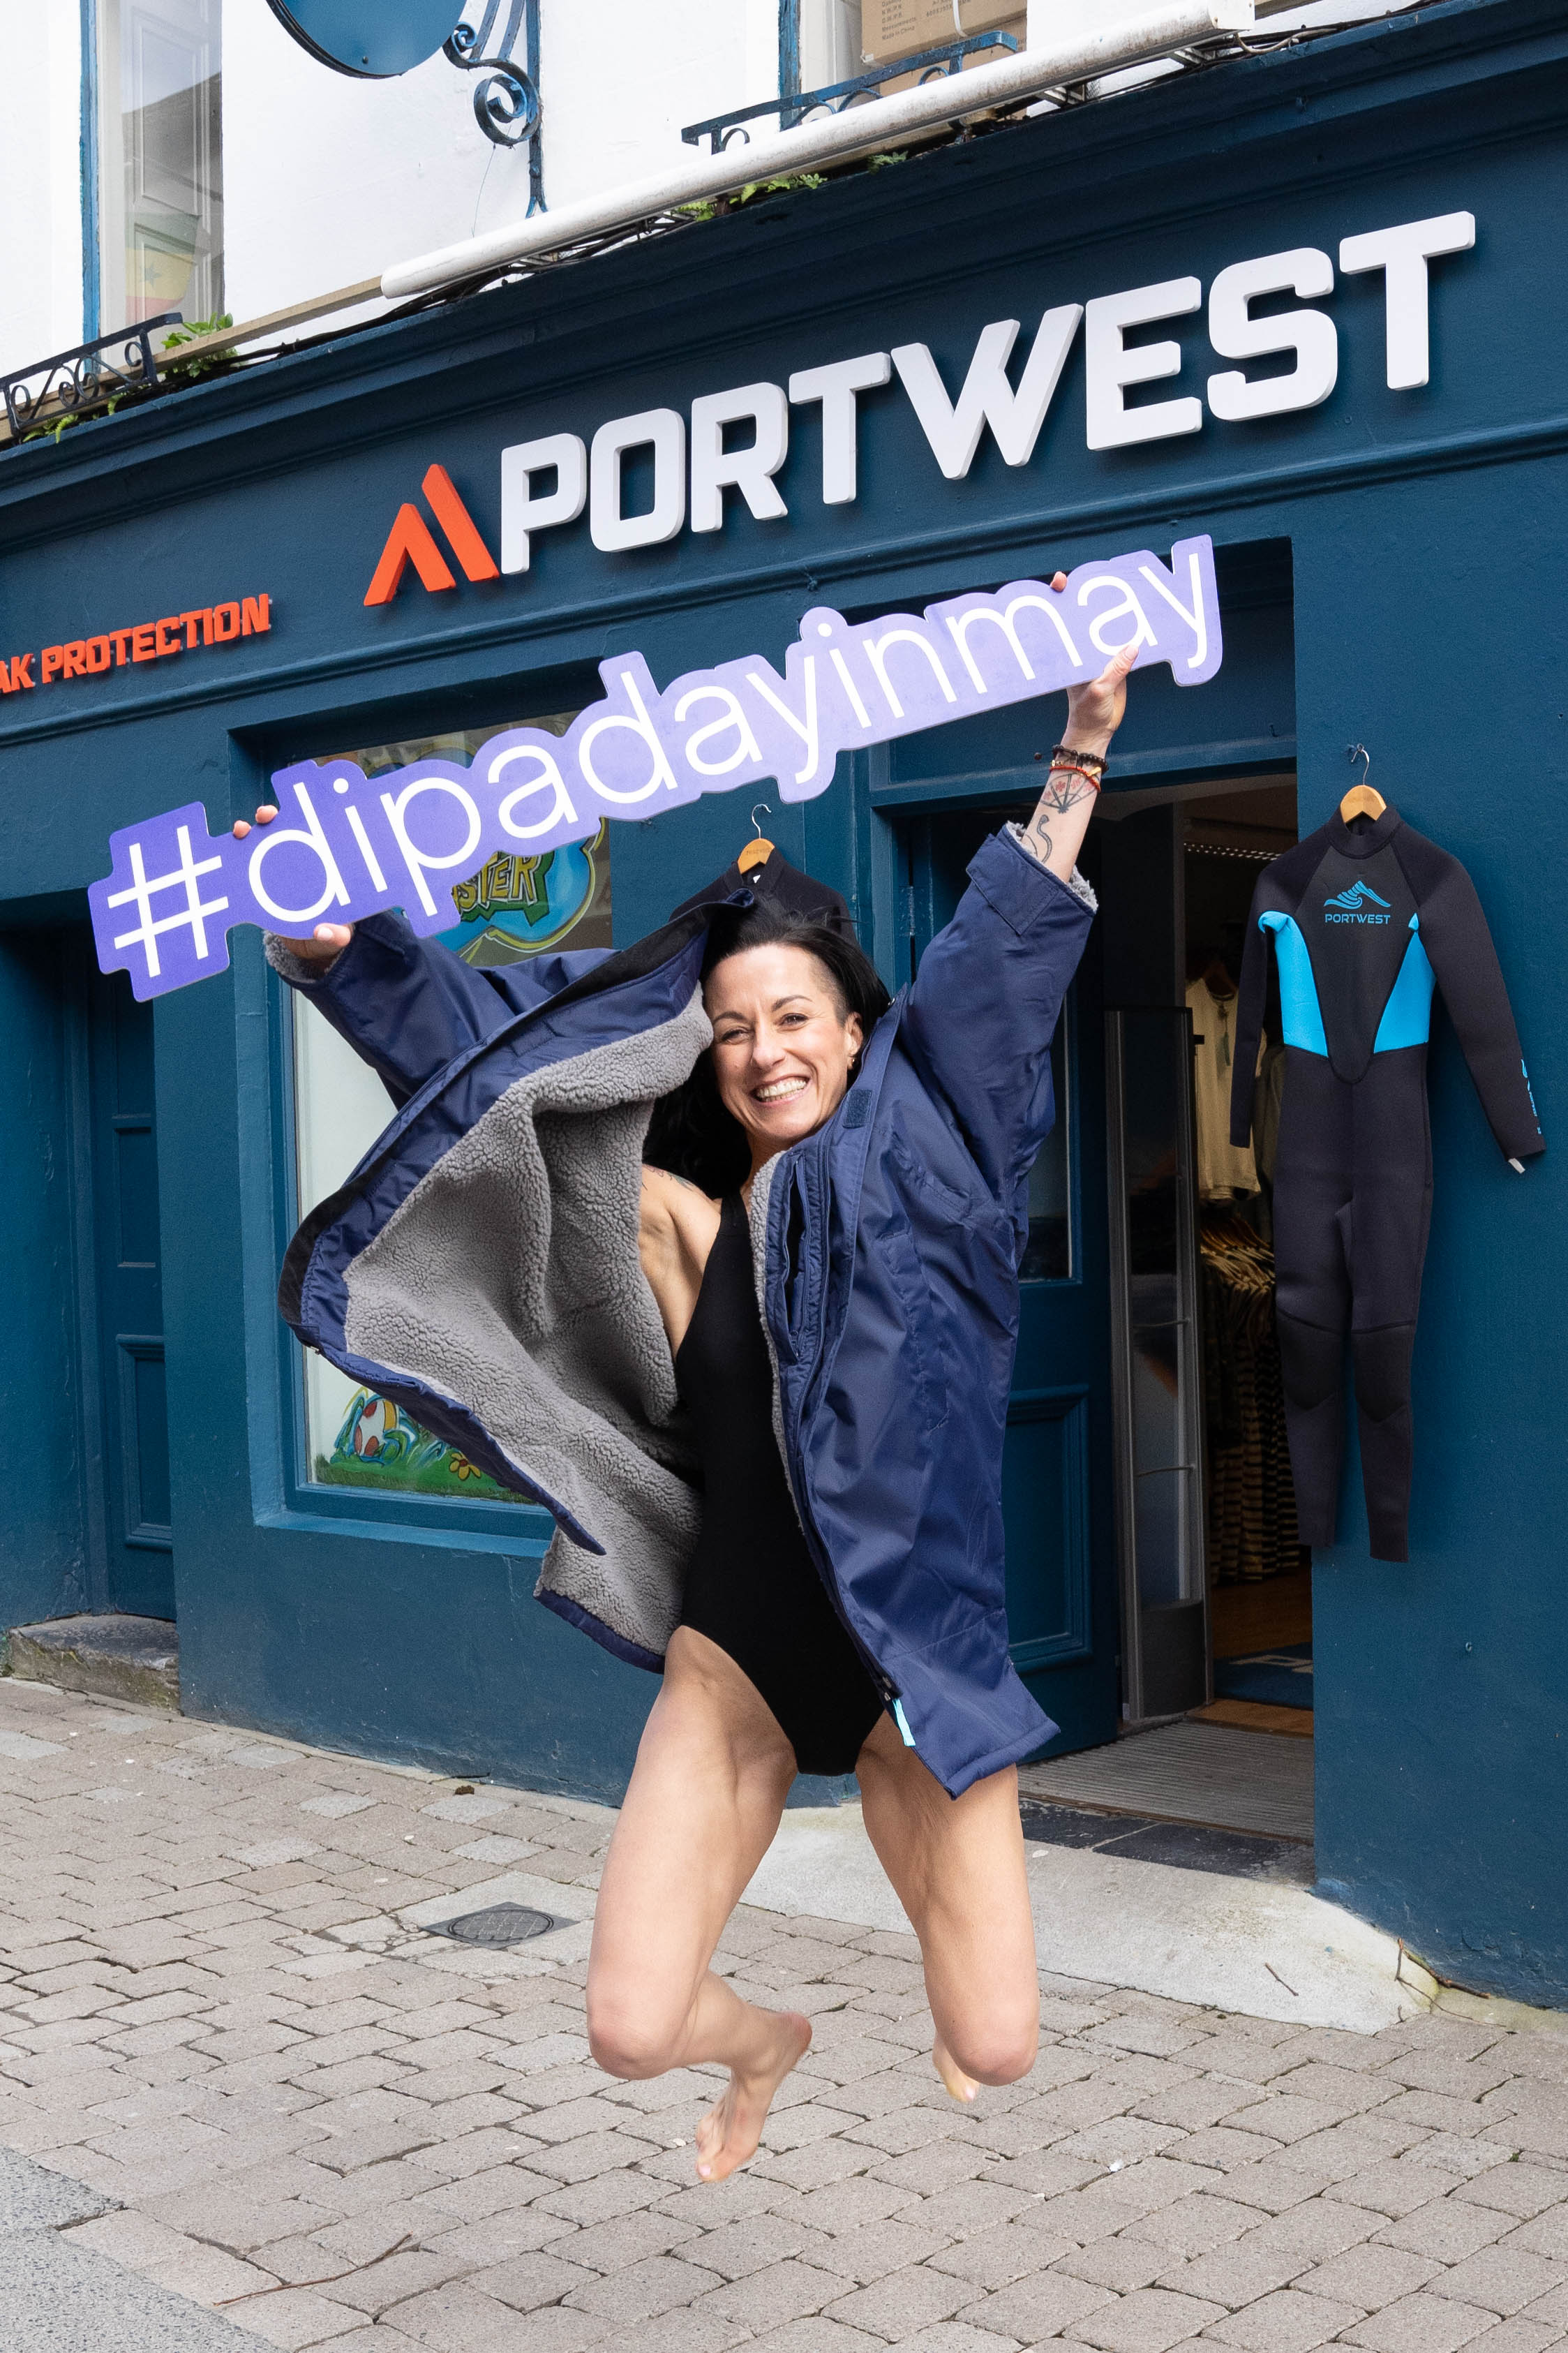 Laura Balta from Mad about Zumba outside Portwest - The Outdoor Shop Galway